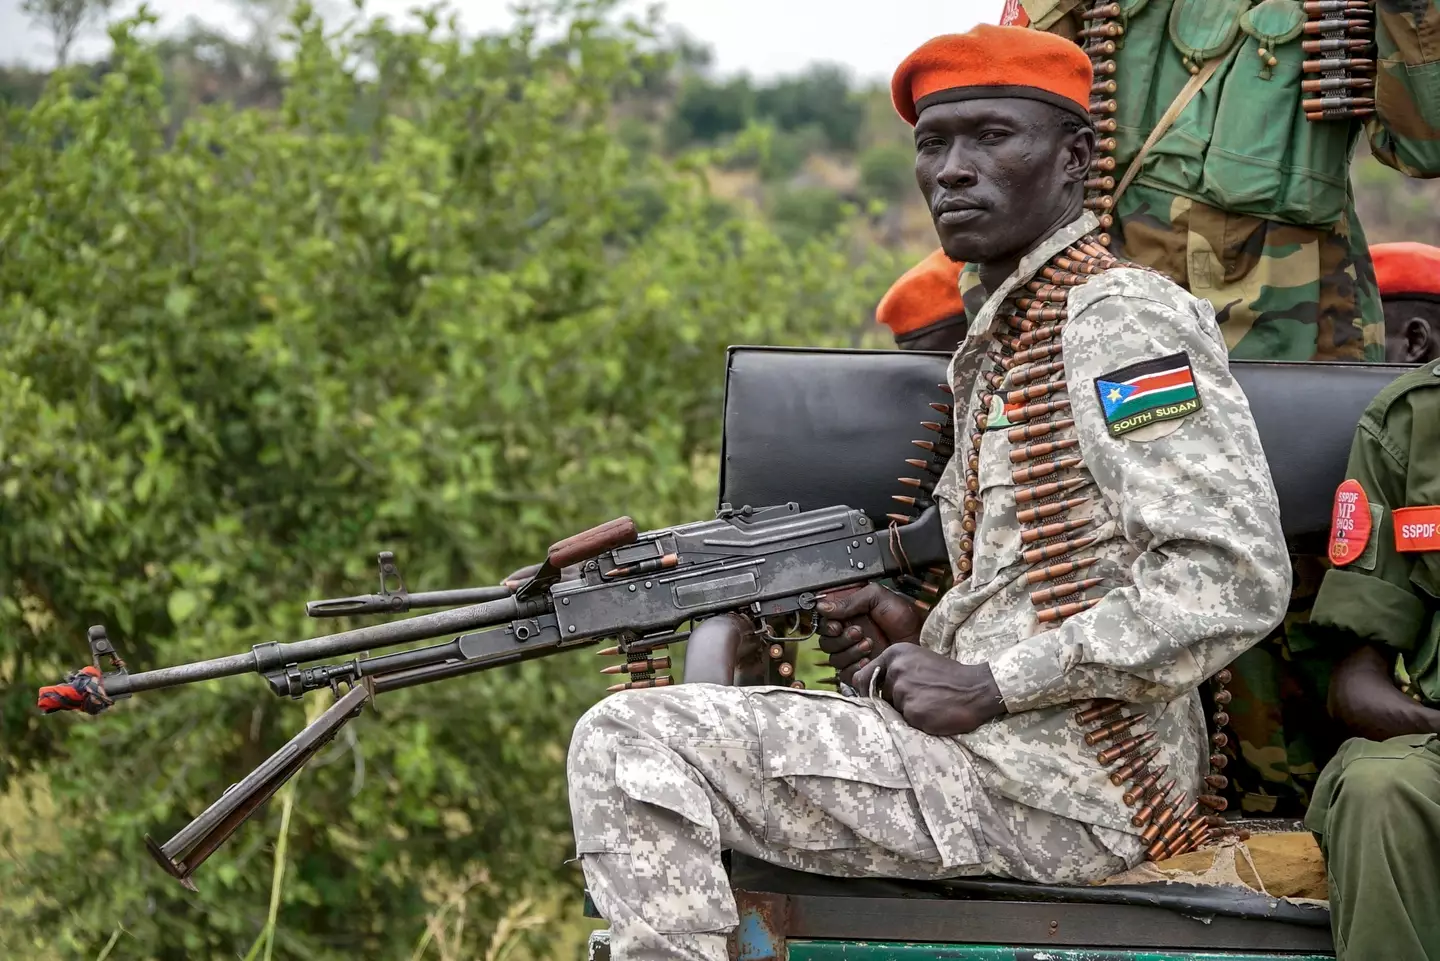 South Sudan is home to conflict and political tensions.